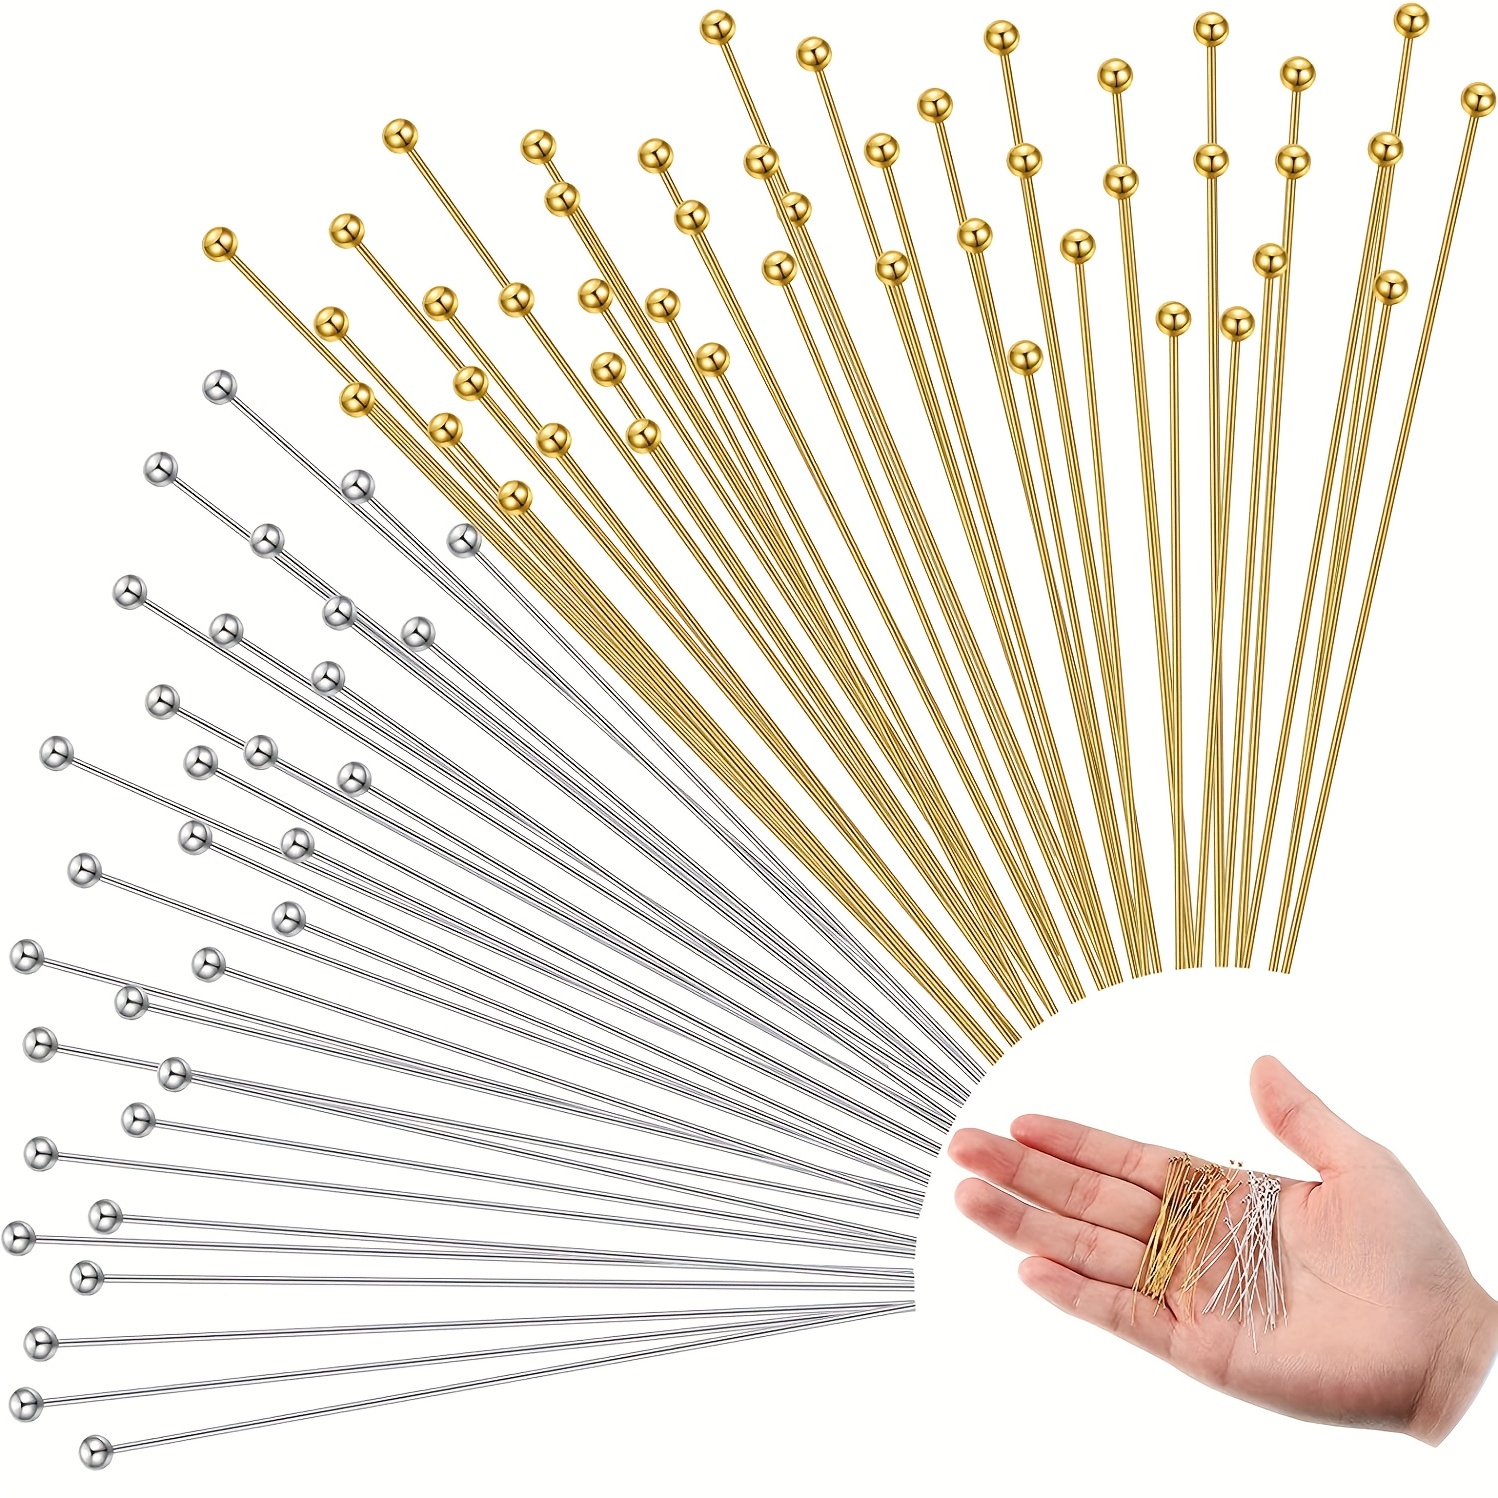 24K Gold Over Sterling Silver Ball End Headpins - 24 ga - 1.5 inch with 2mm  ball (50 pcs), Jewelry Making Chains Supplies Wholesaler